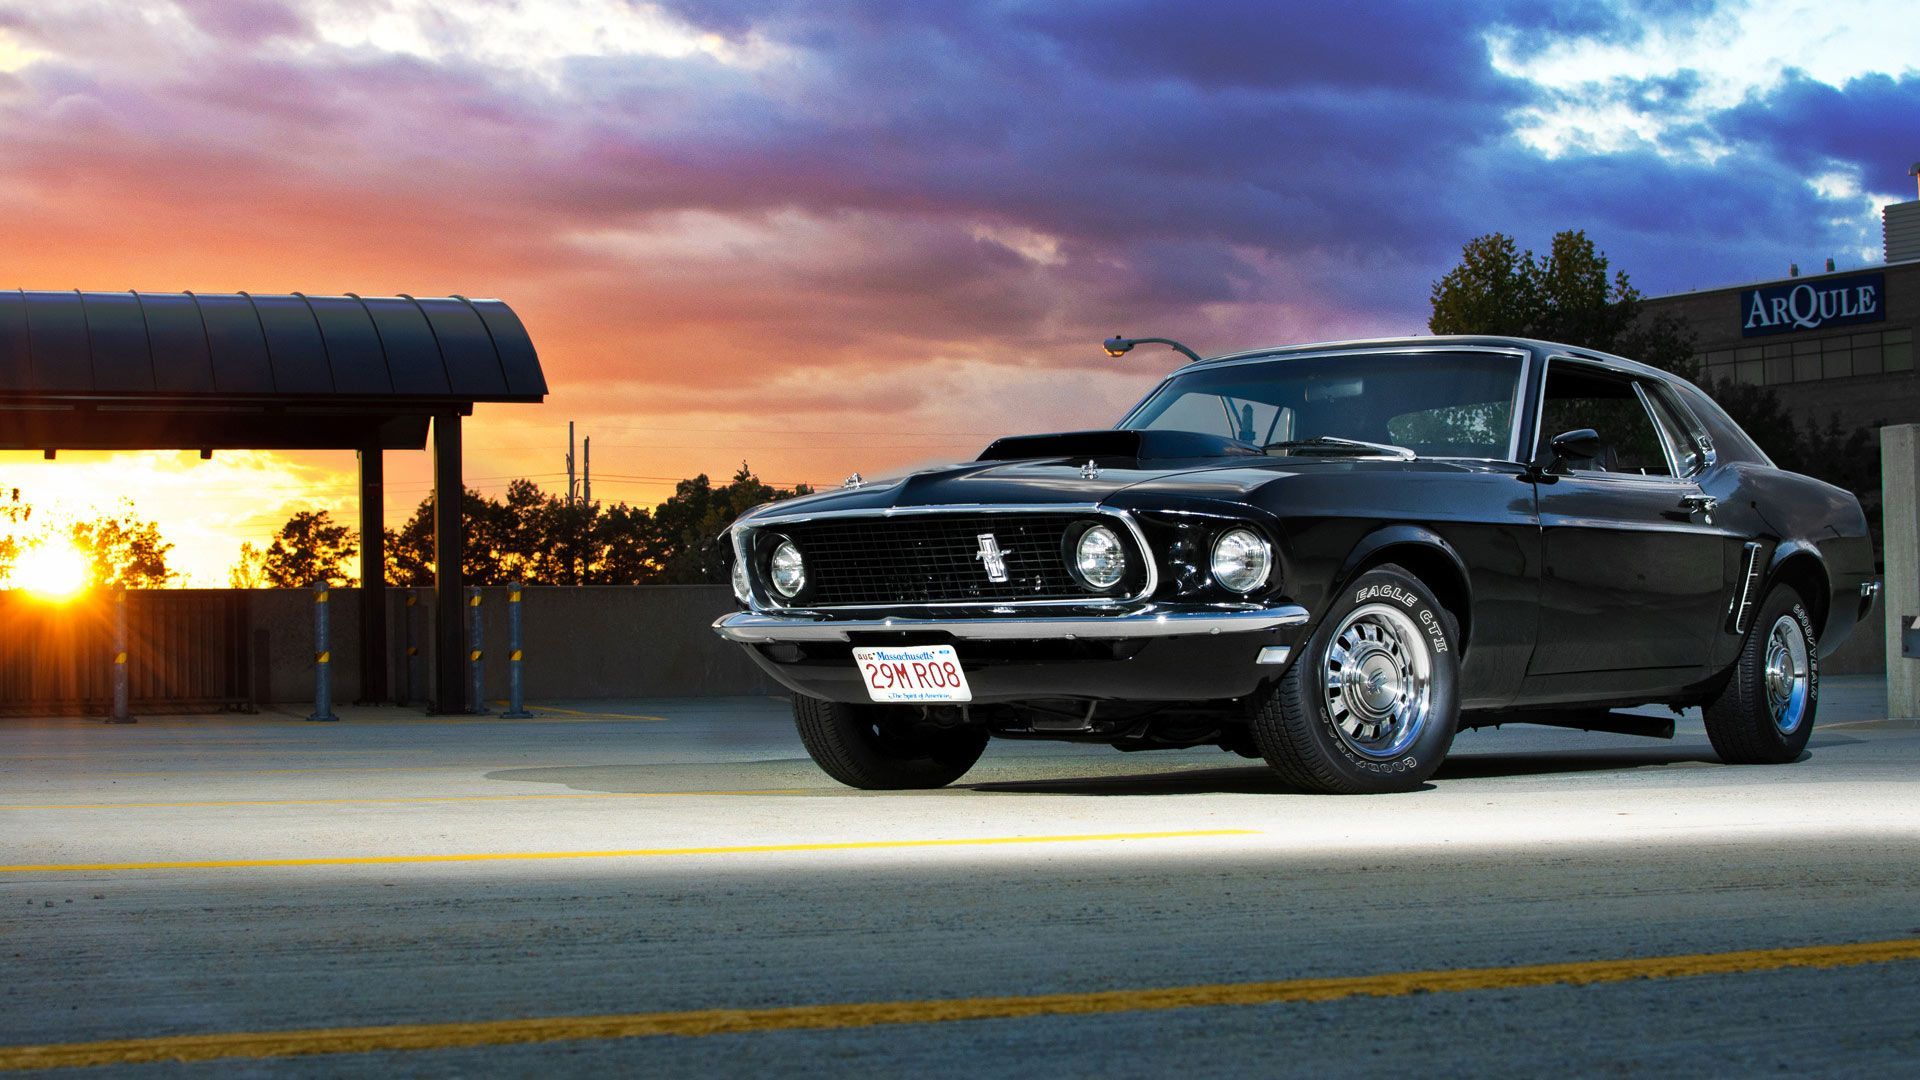 635 Ford Mustang HD Wallpapers | Backgrounds - Wallpaper Abyss